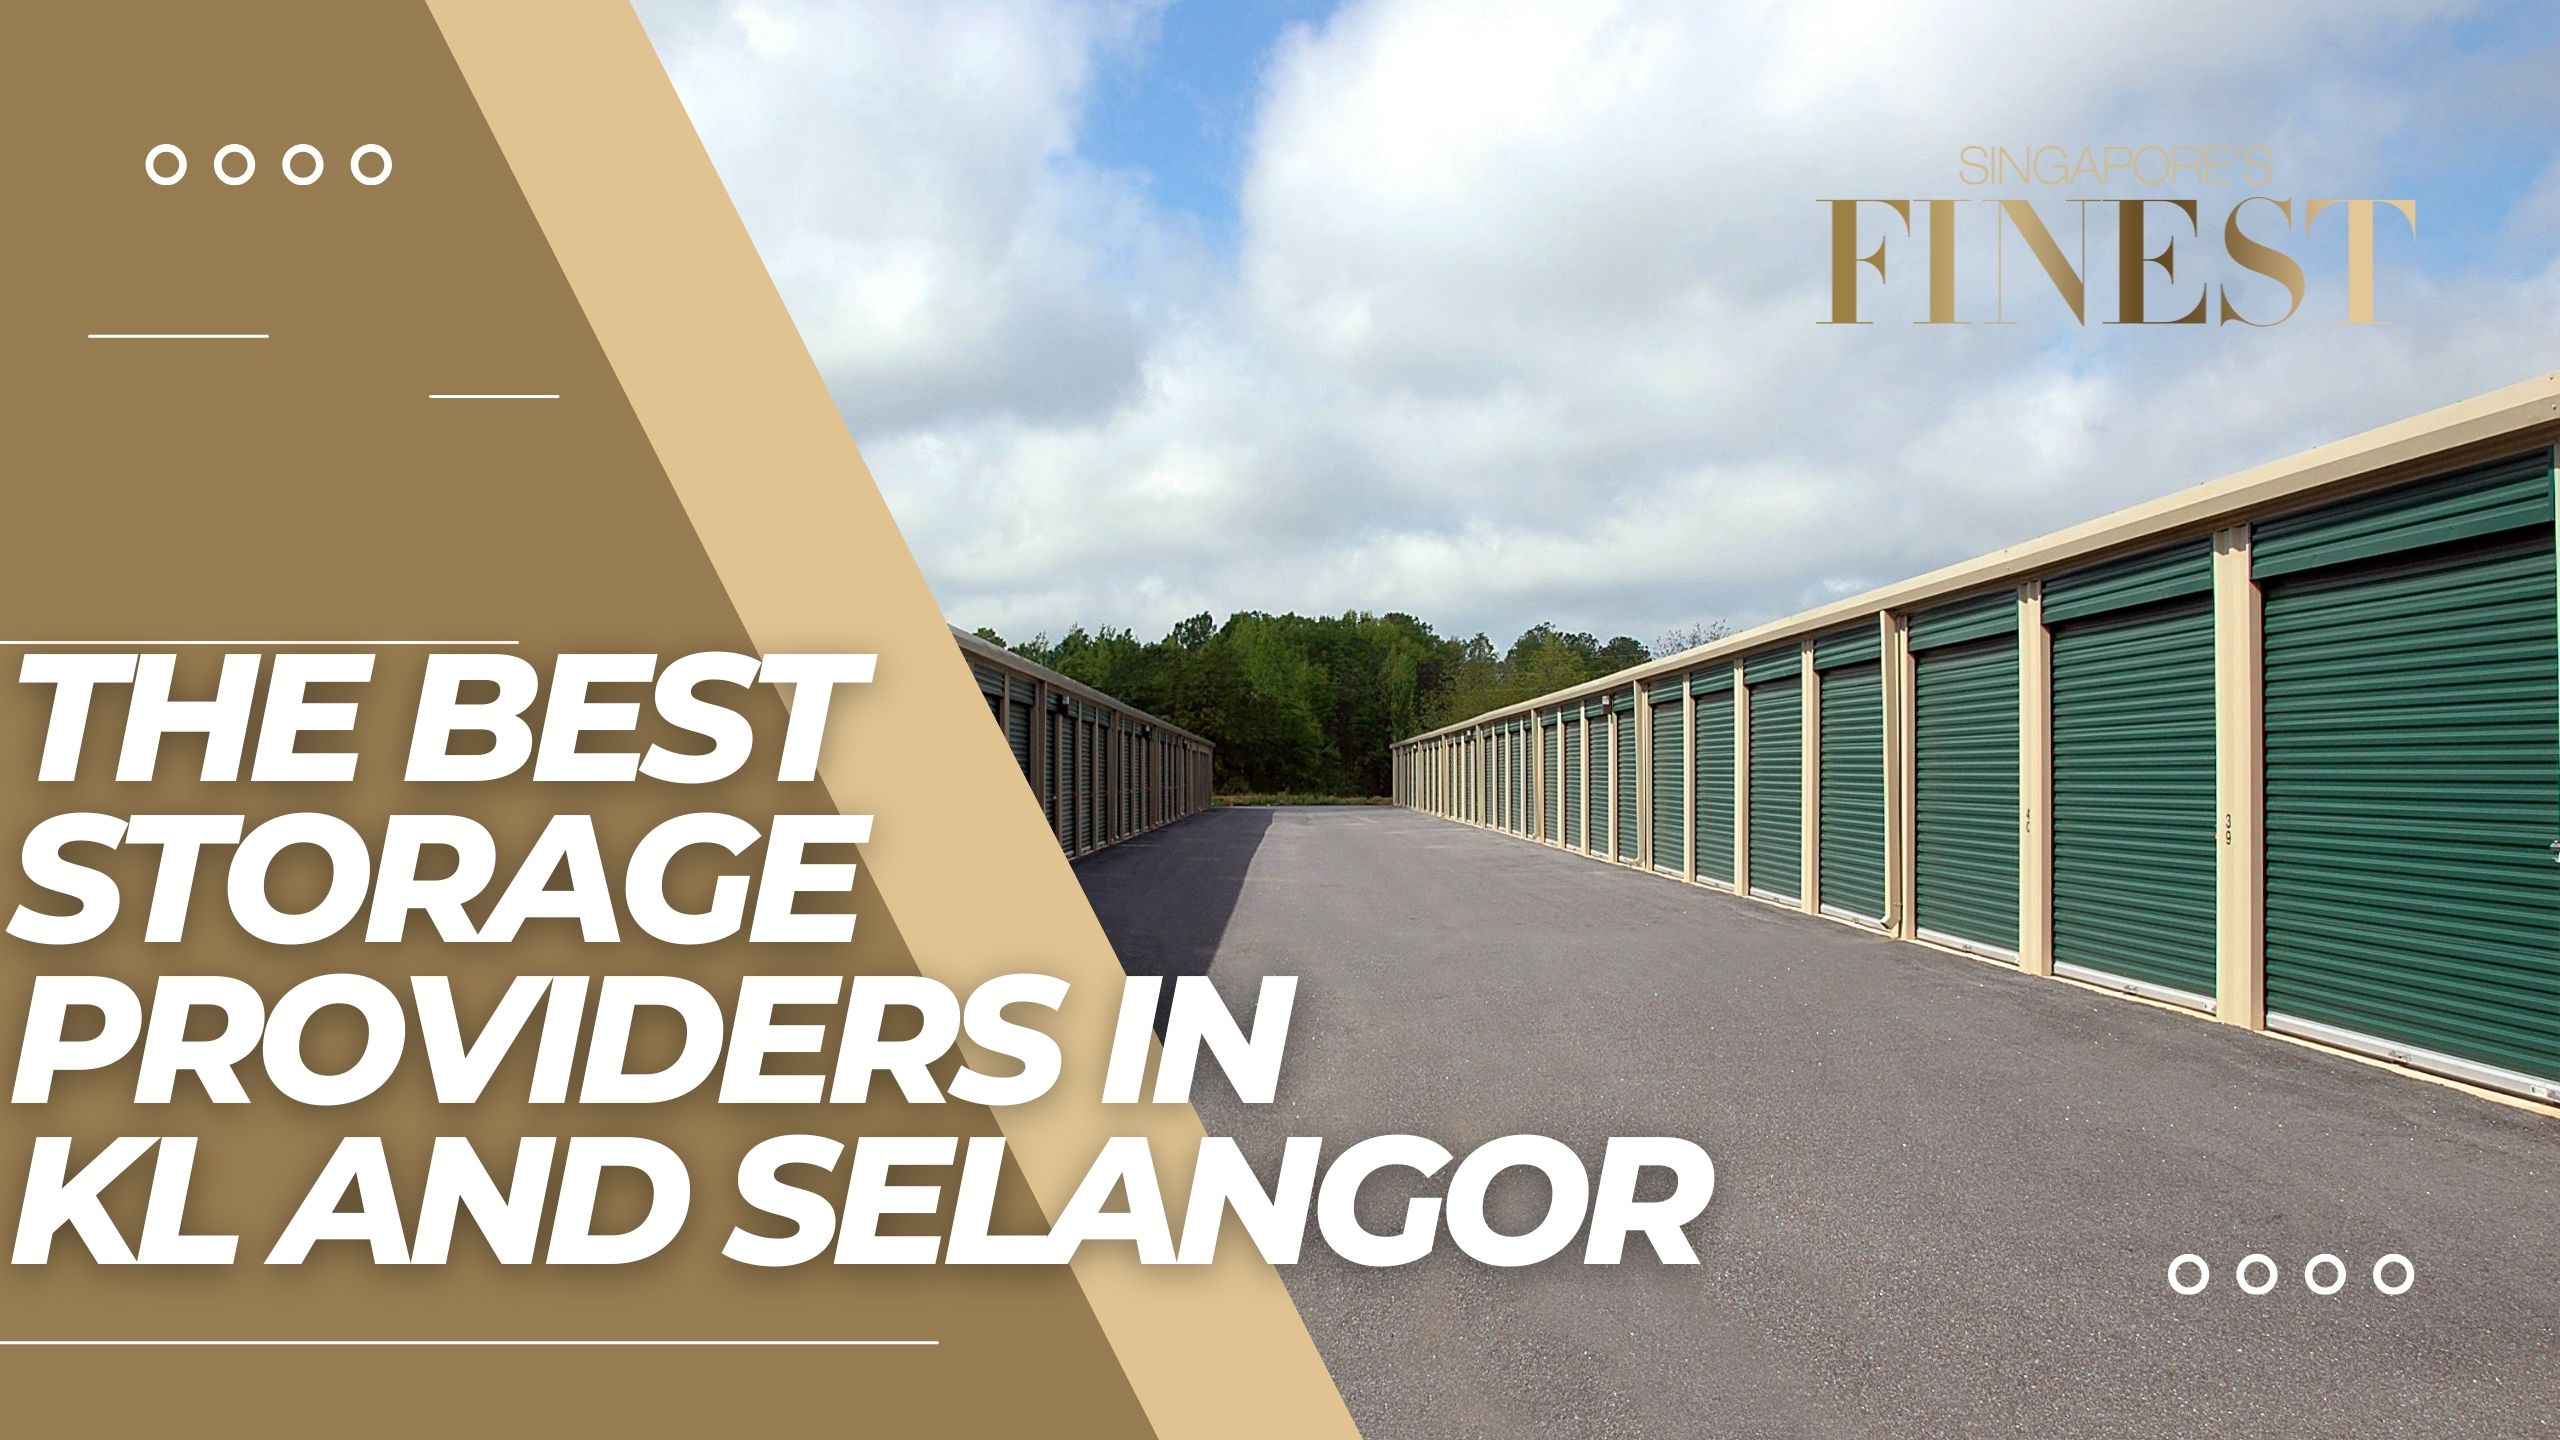 The Finest Storage Providers In KL and Selangor